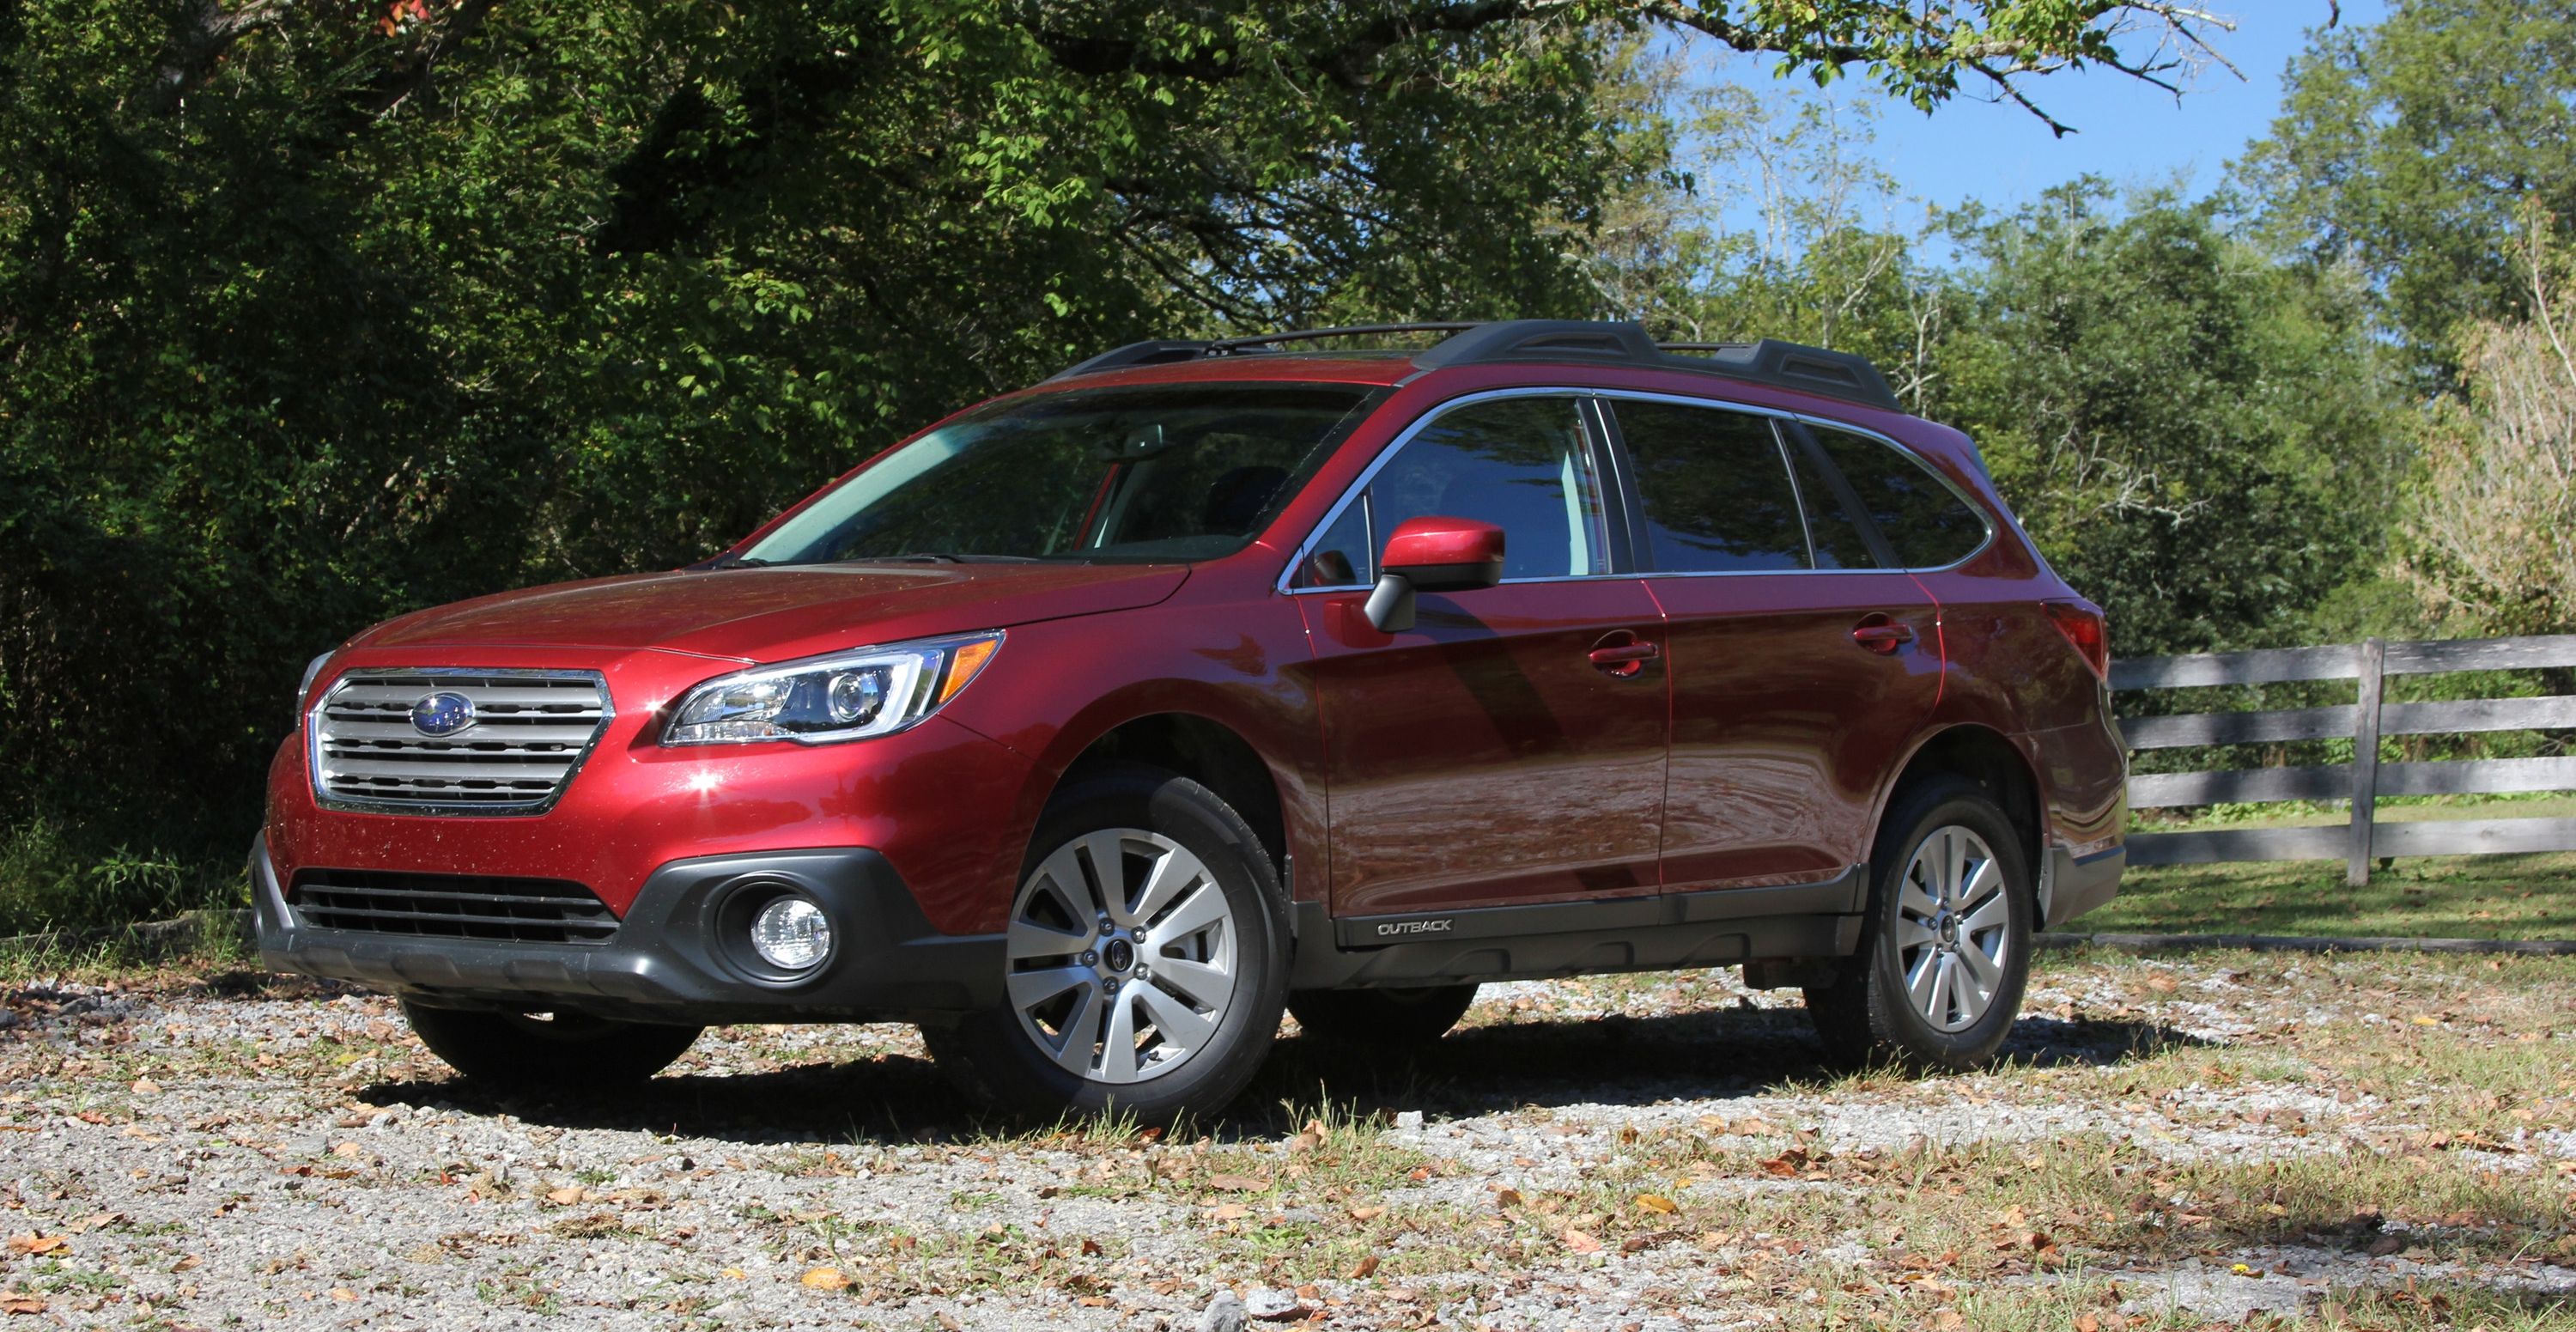  Christian once loved Subarus; was his love reignited when he tested out the 2015 Outback?